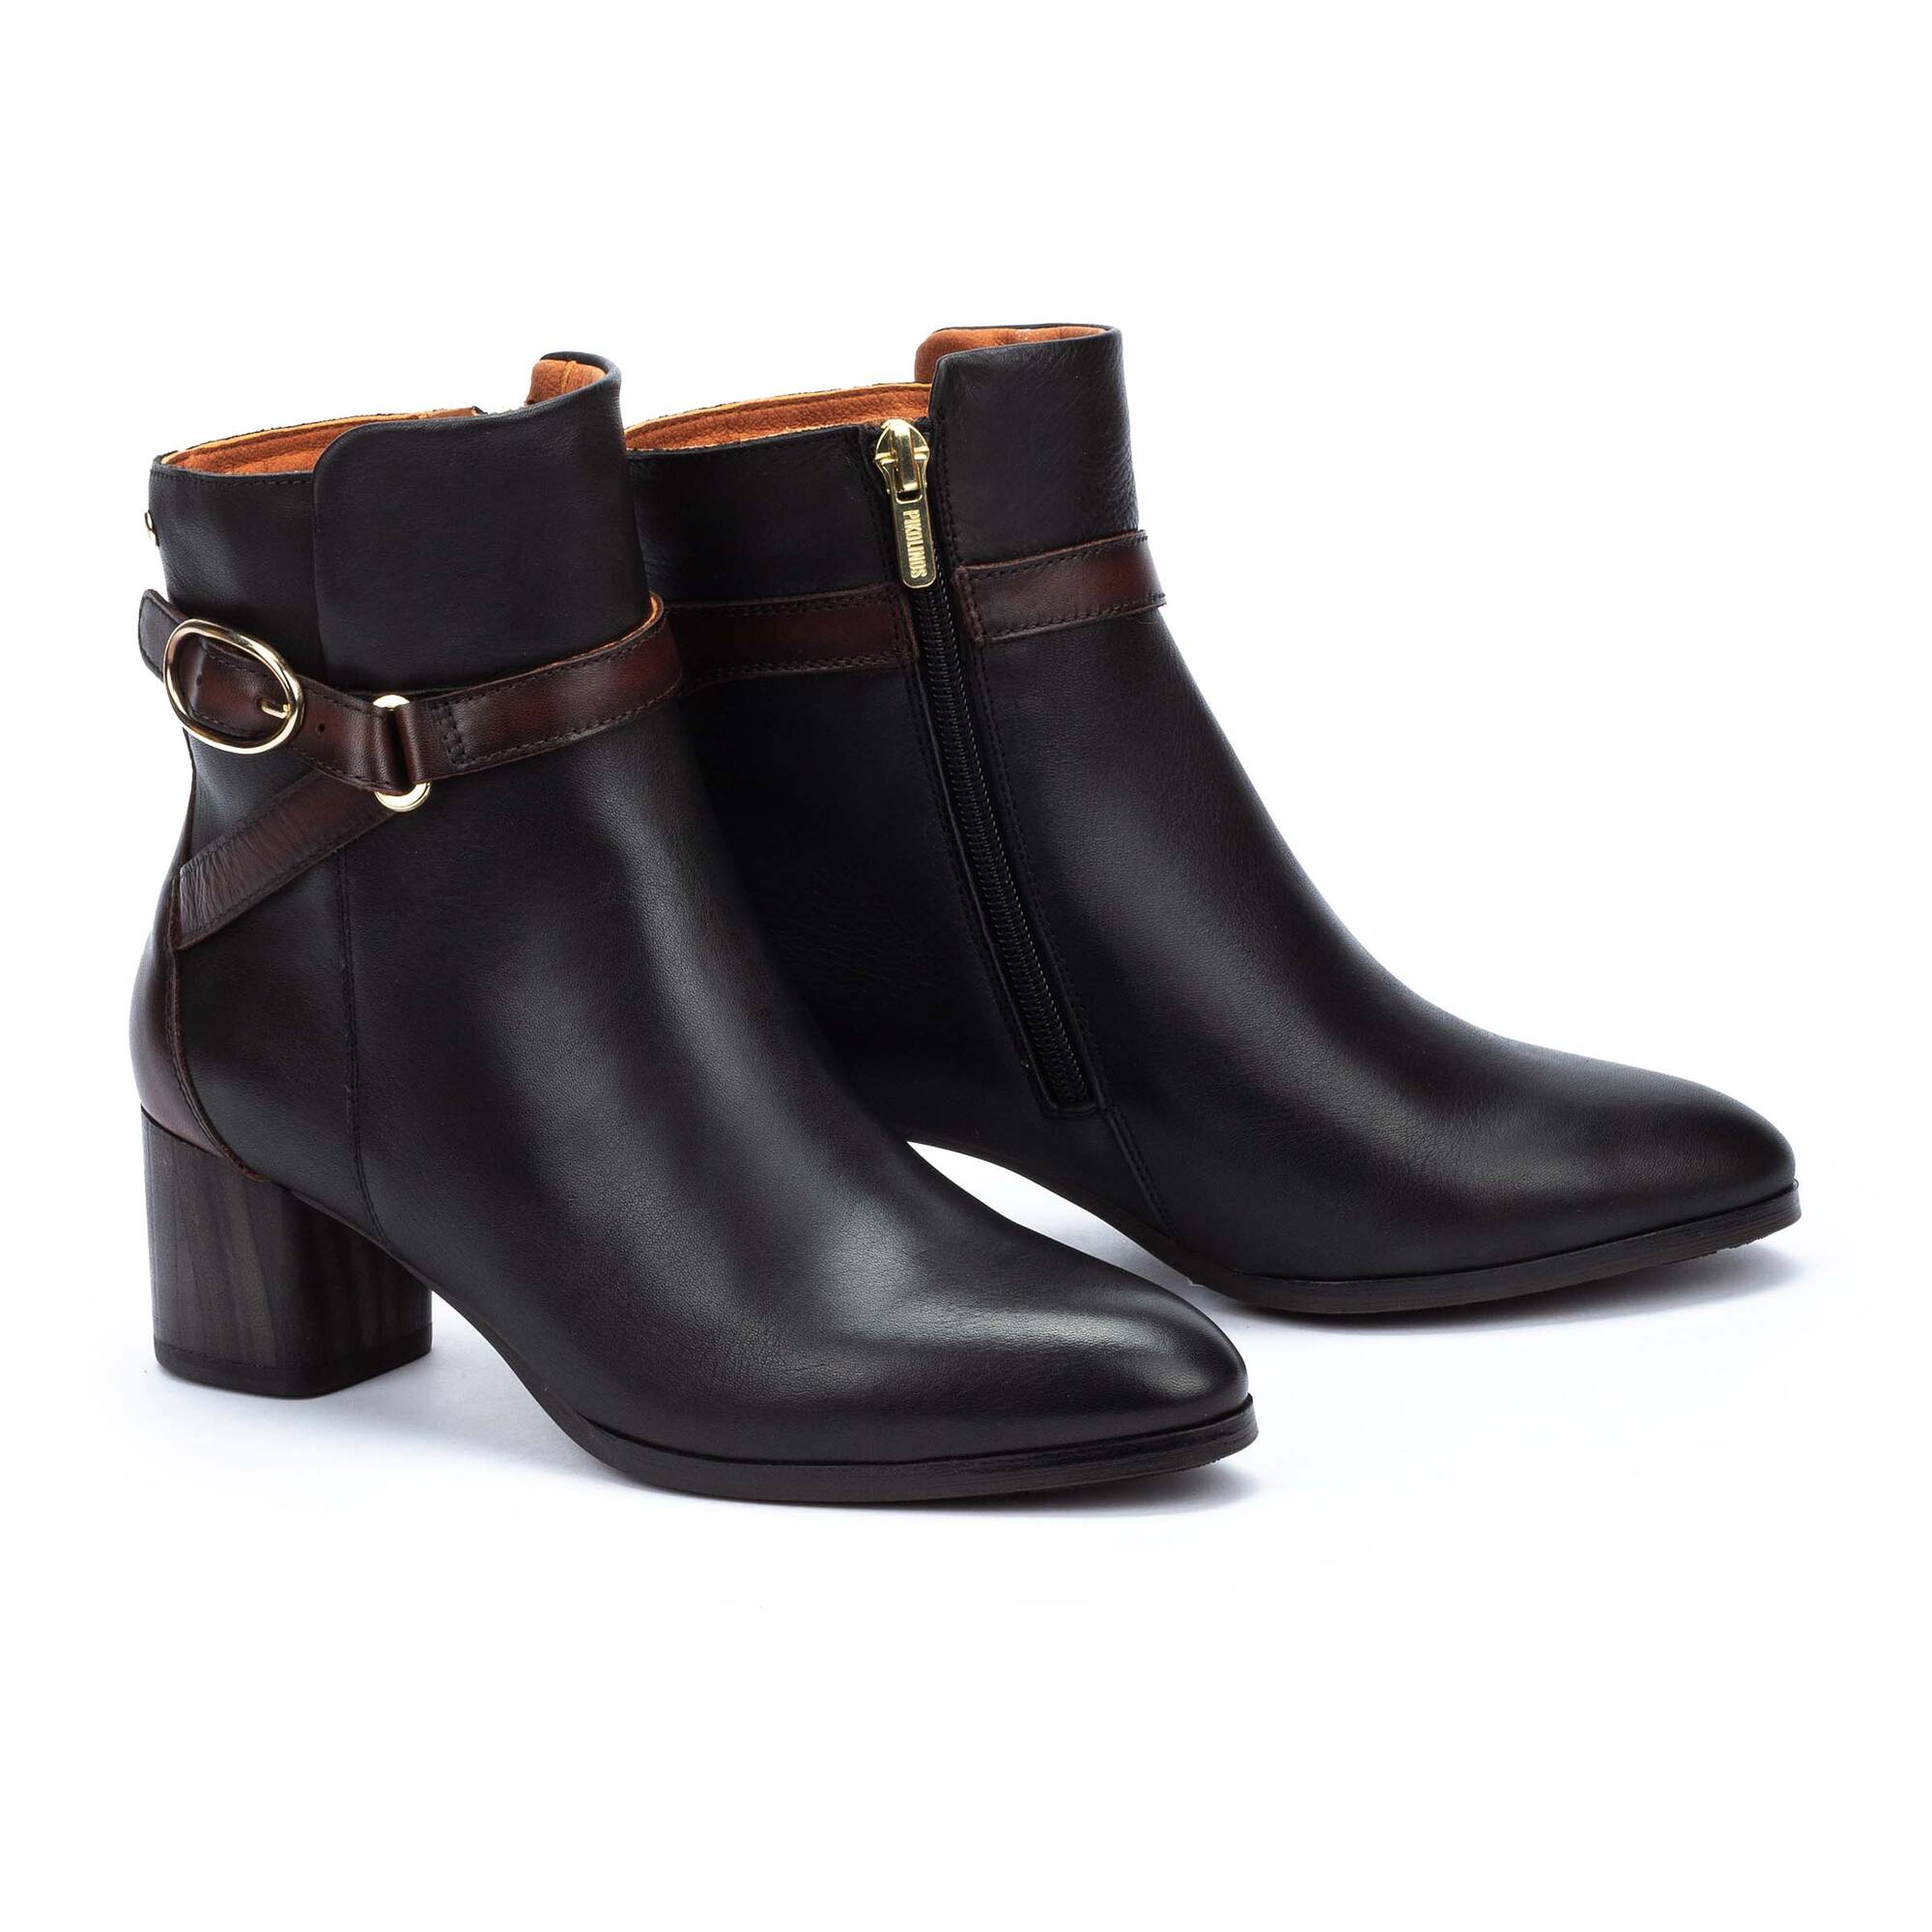 Women's Pikolinos Calafat Ankle Boots with Buckle Color: Black